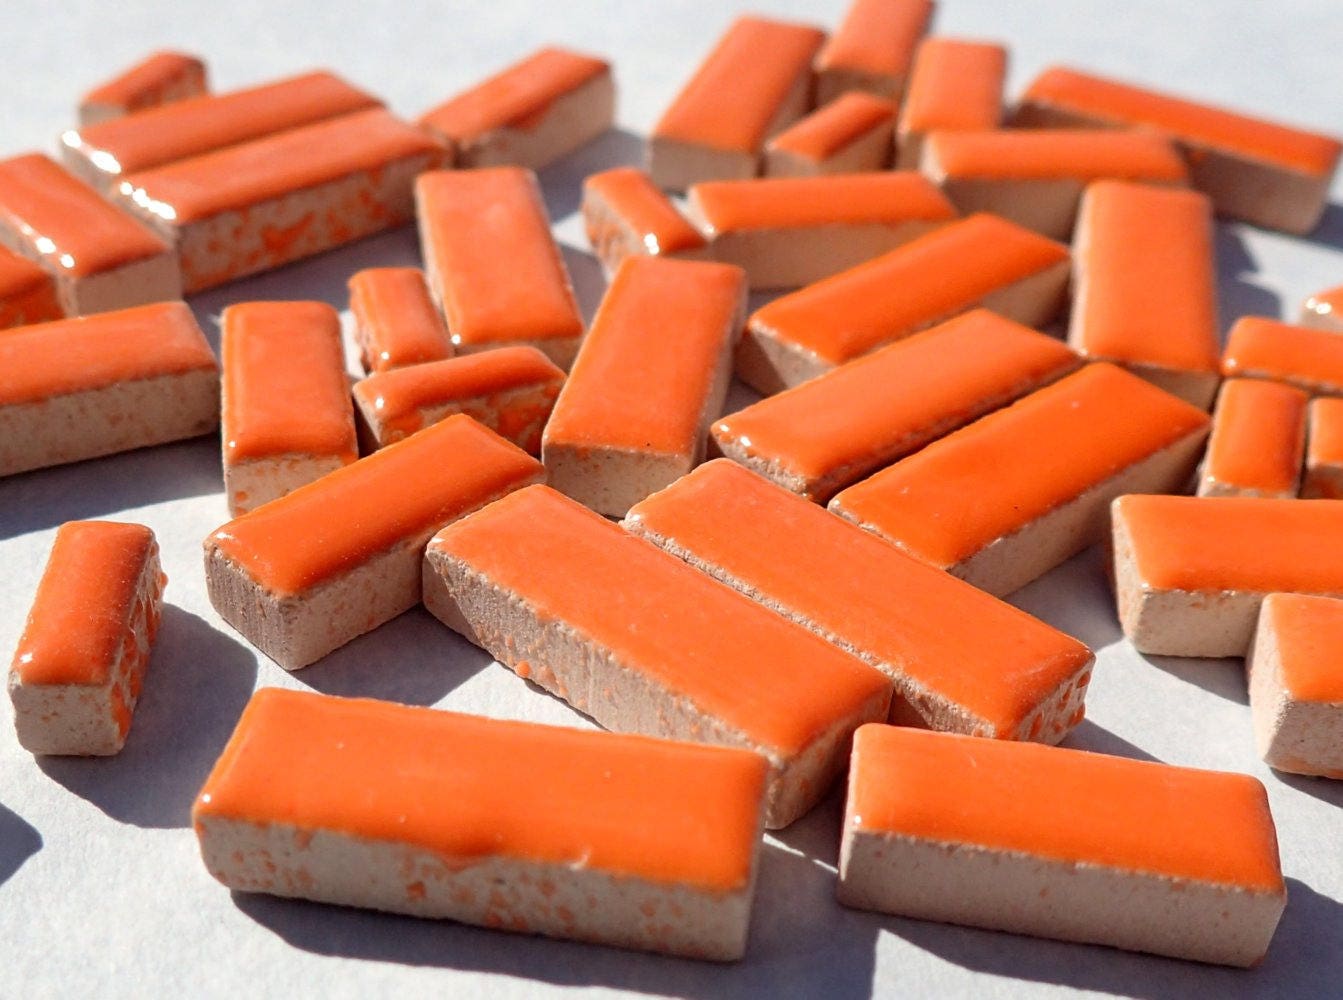 Orange Mini Rectangles Mosaic Tiles - 50g Ceramic in Mix of 3 Sizes 3/8" and 5/8" and 3/4"